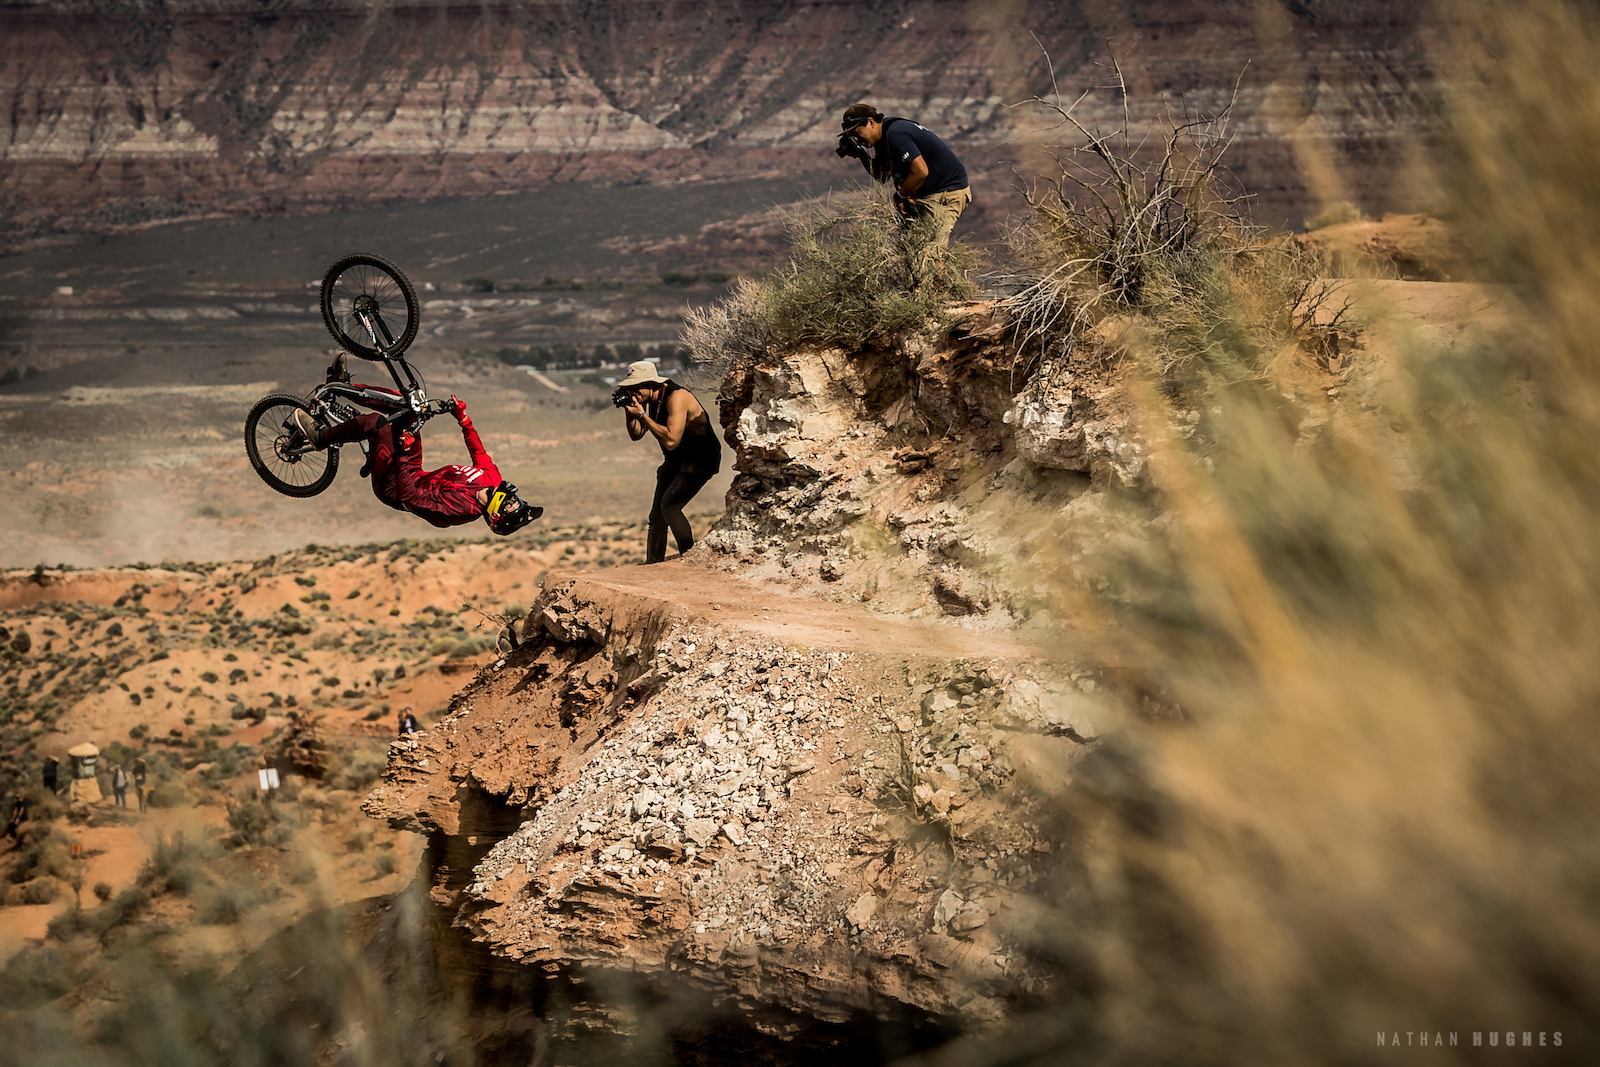 Flat drop flips for the win... Brandon Semenuk continues to show the world the true potential of mountainbiking.